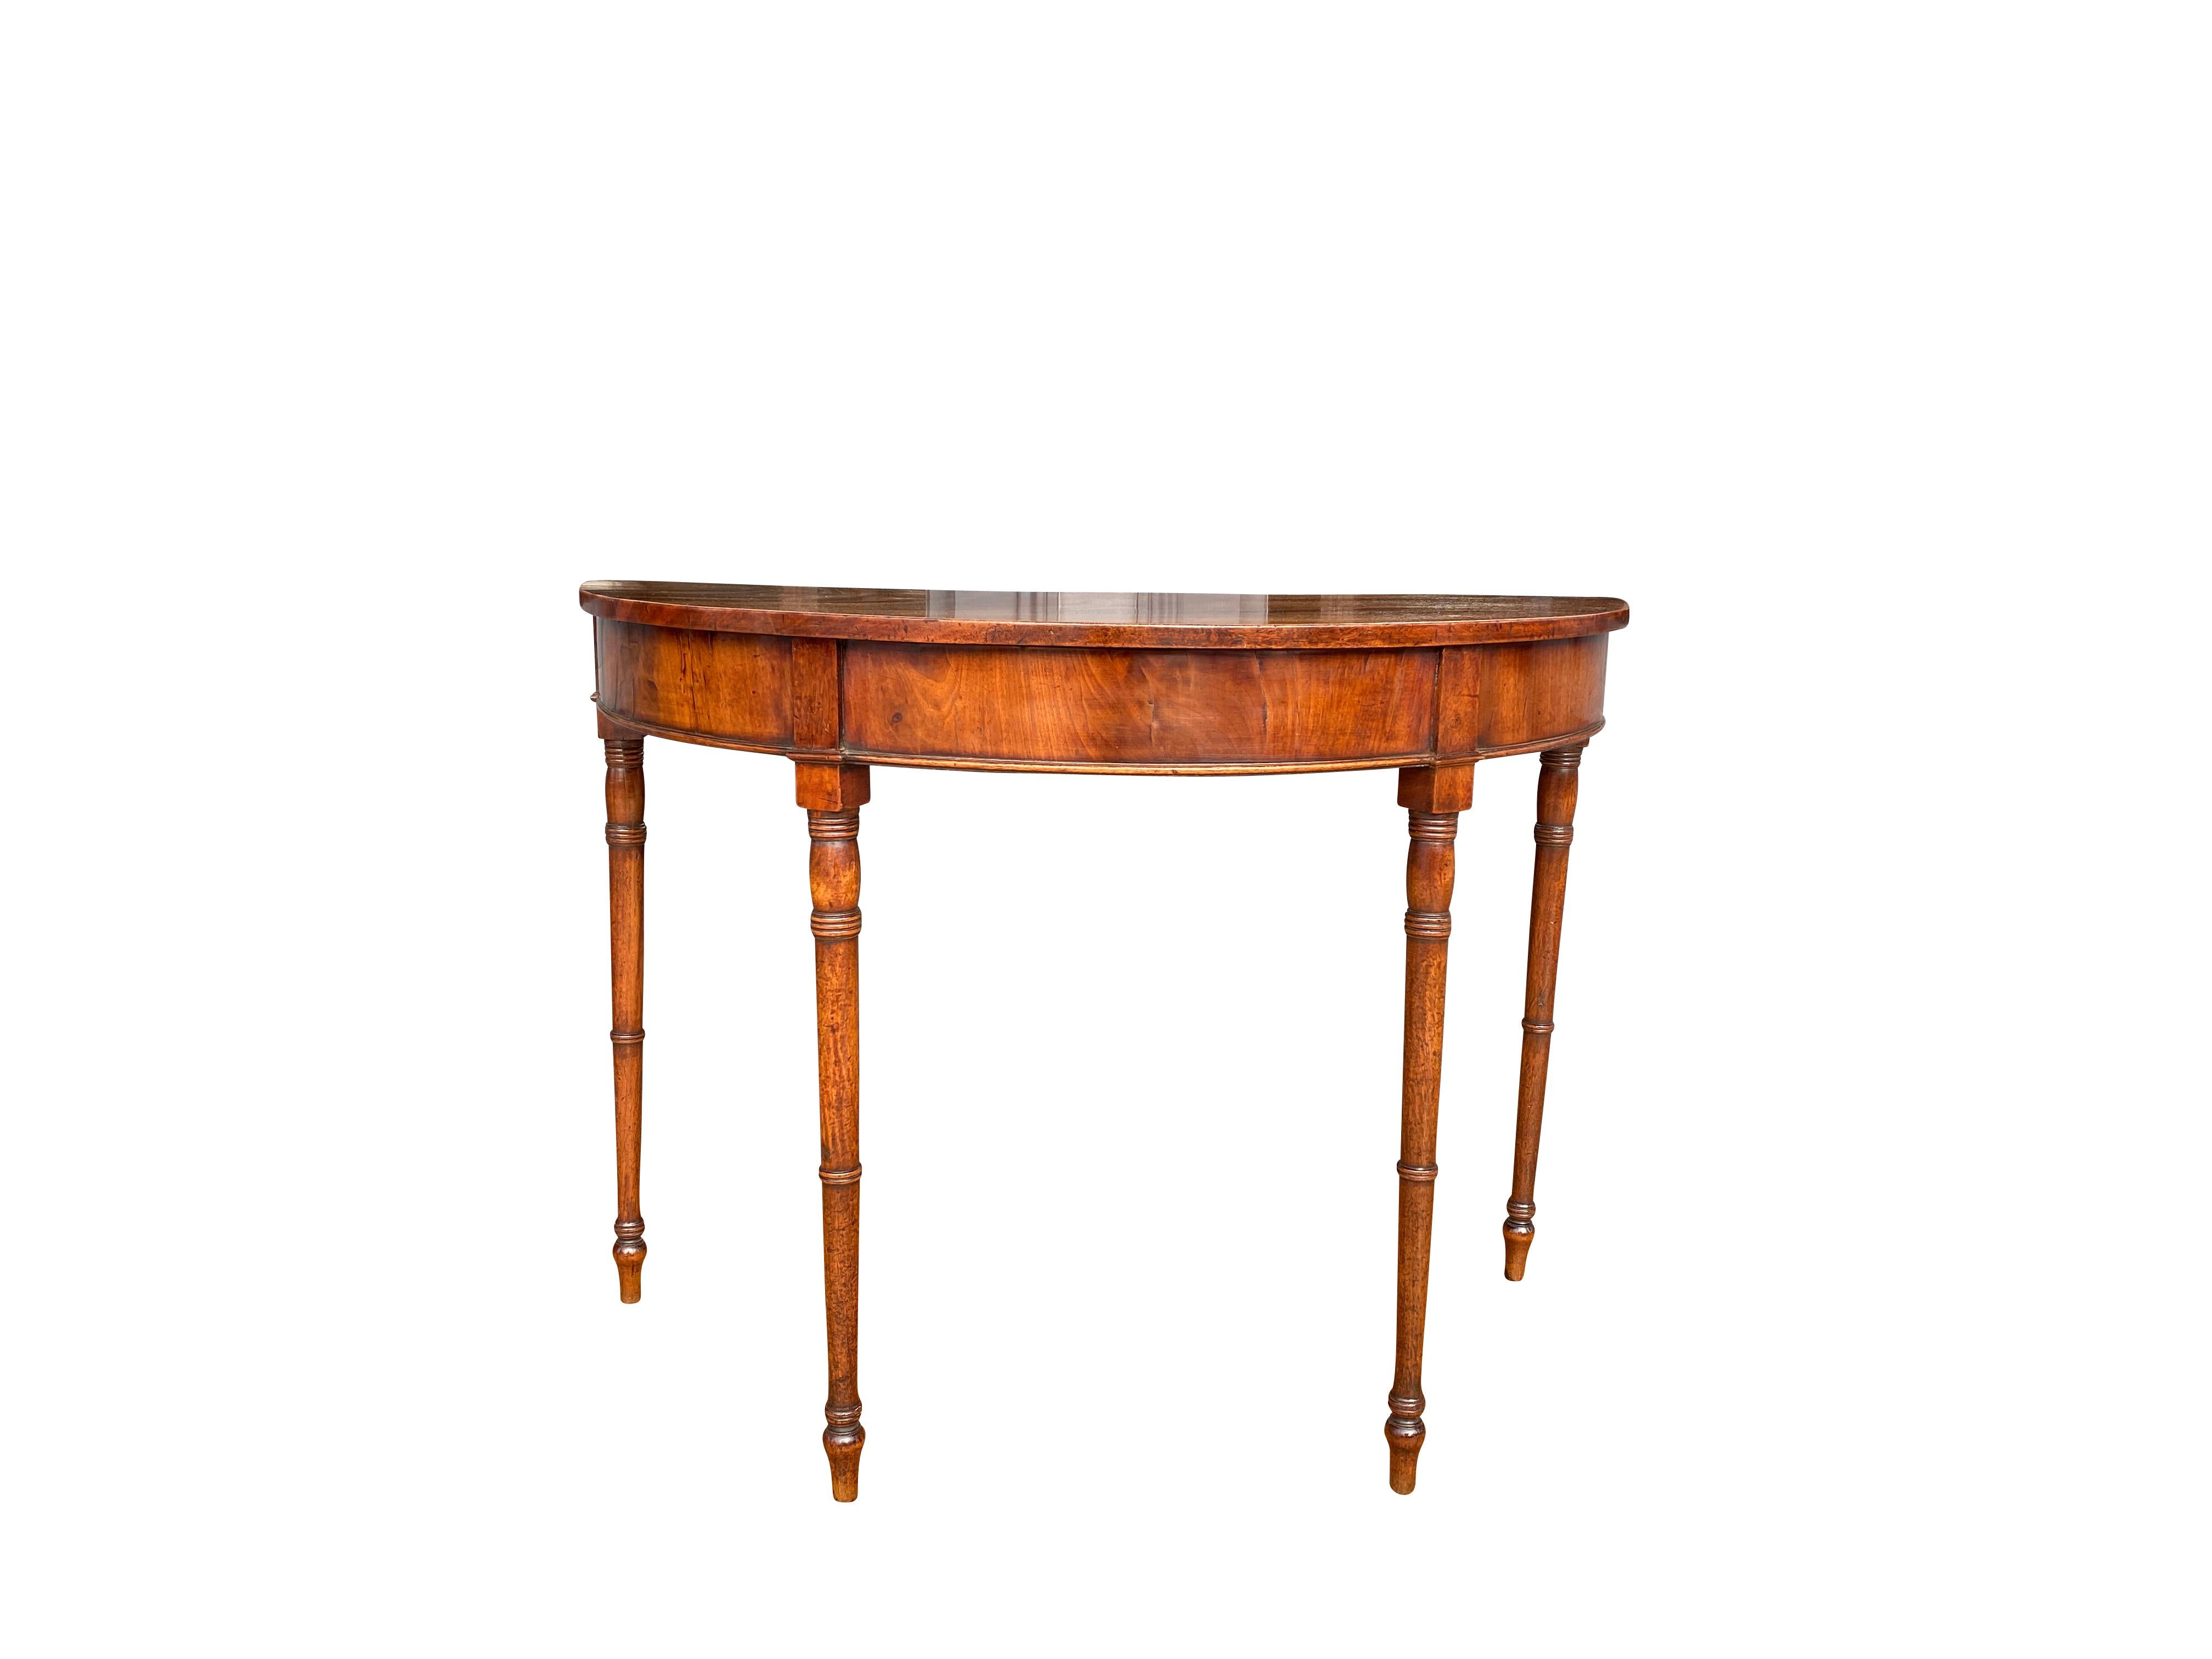 Each demilune shape with conforming frieze raised on circular tapered bamboo turned legs. Ex ; Sothebys NY sale.